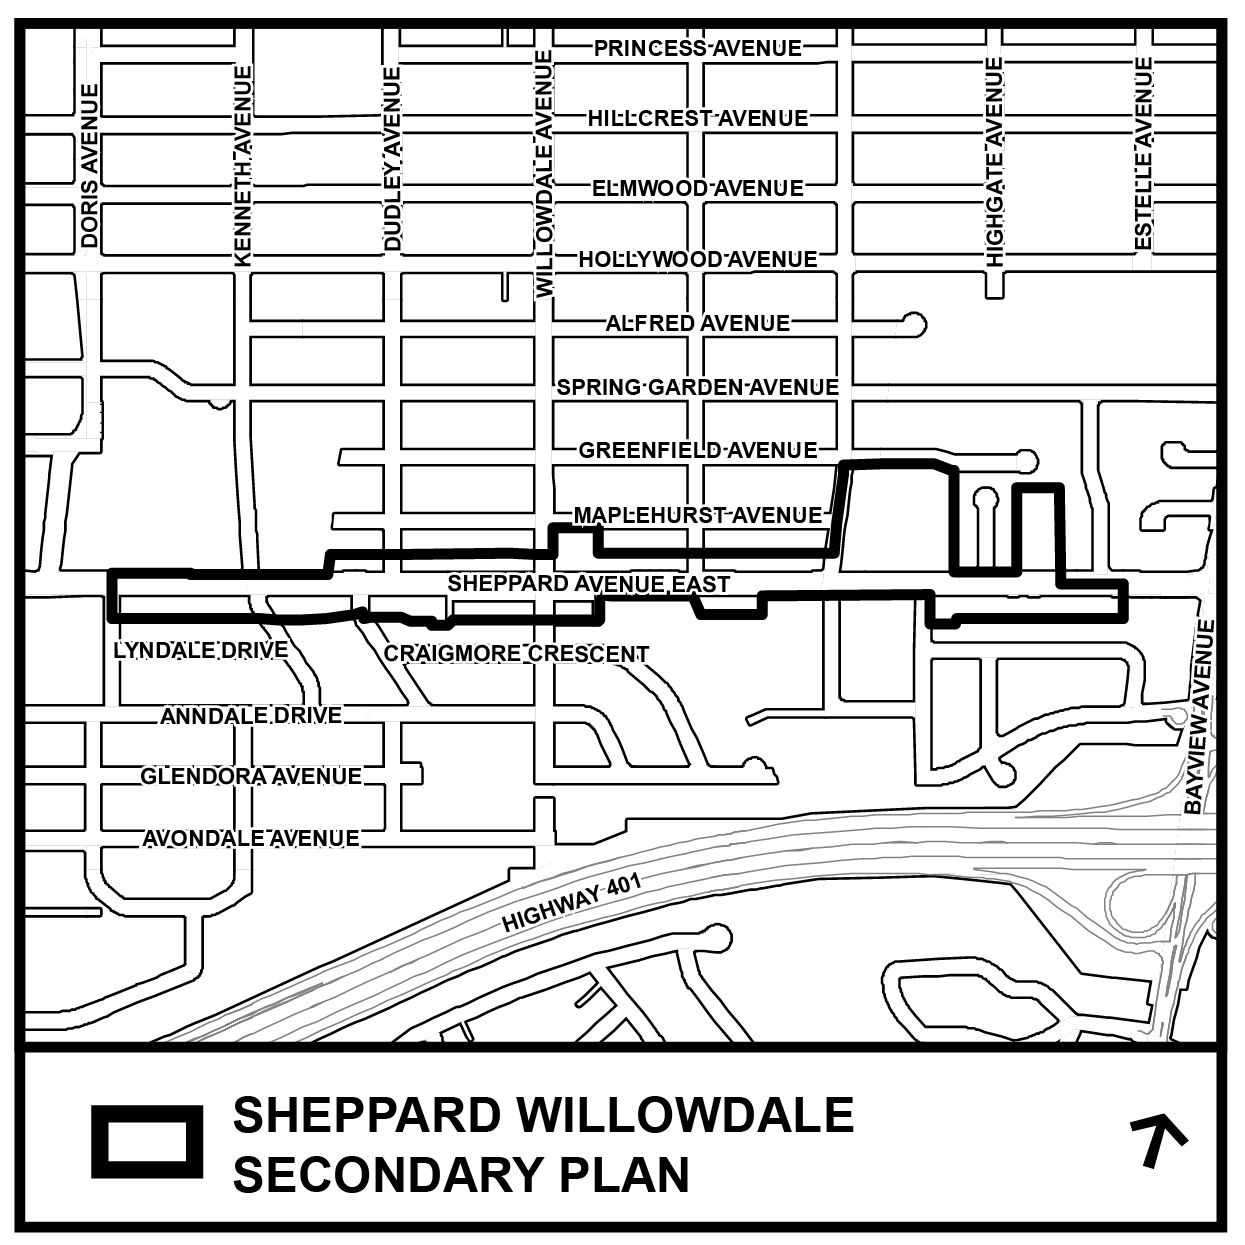 Study area map of the Sheppard Avenue Commercial Area Secondary Plan Review, along the East segment of Sheppard Avenue